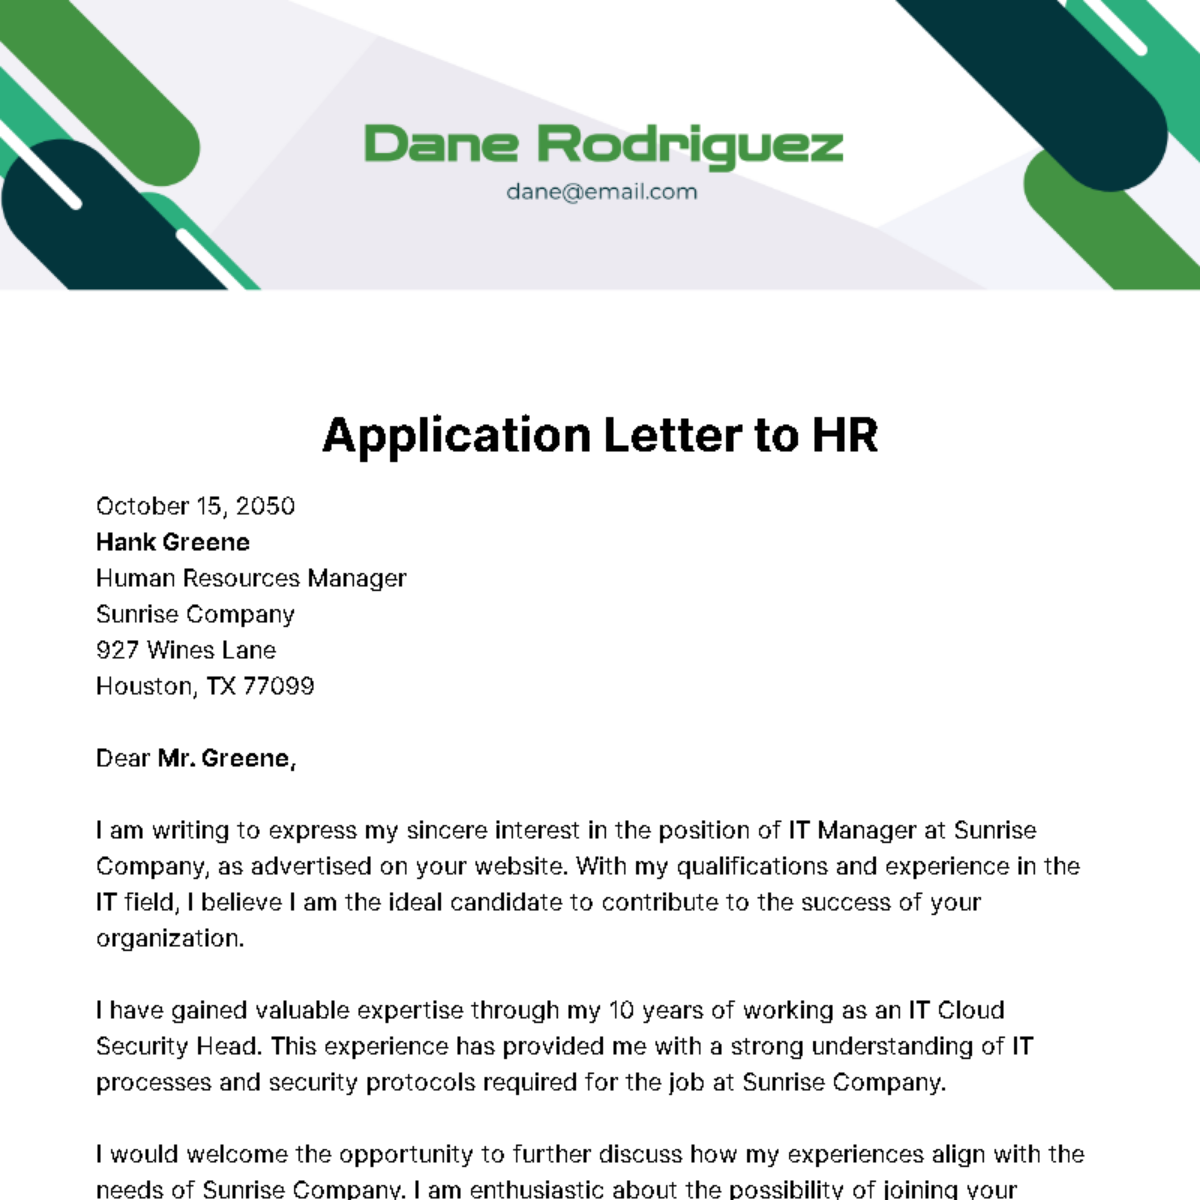 Application Letter to HR Template